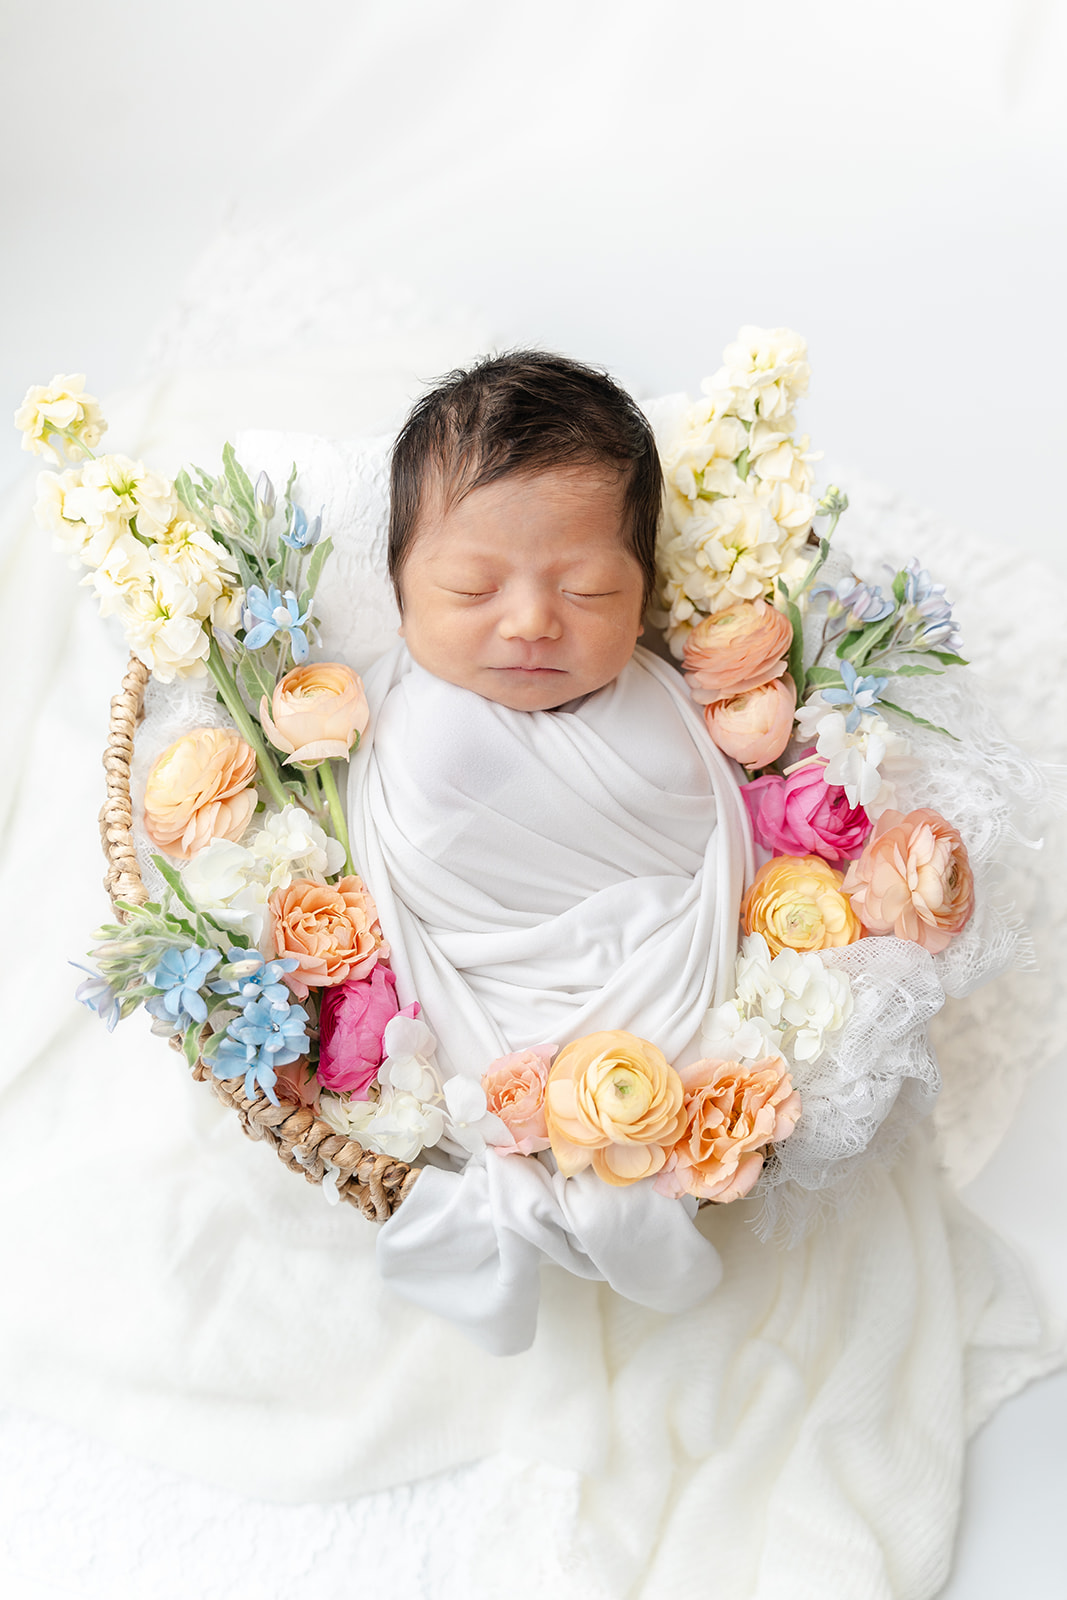 A newborn baby sleeps in a white swaddle in a woven basket surrounded by flowers